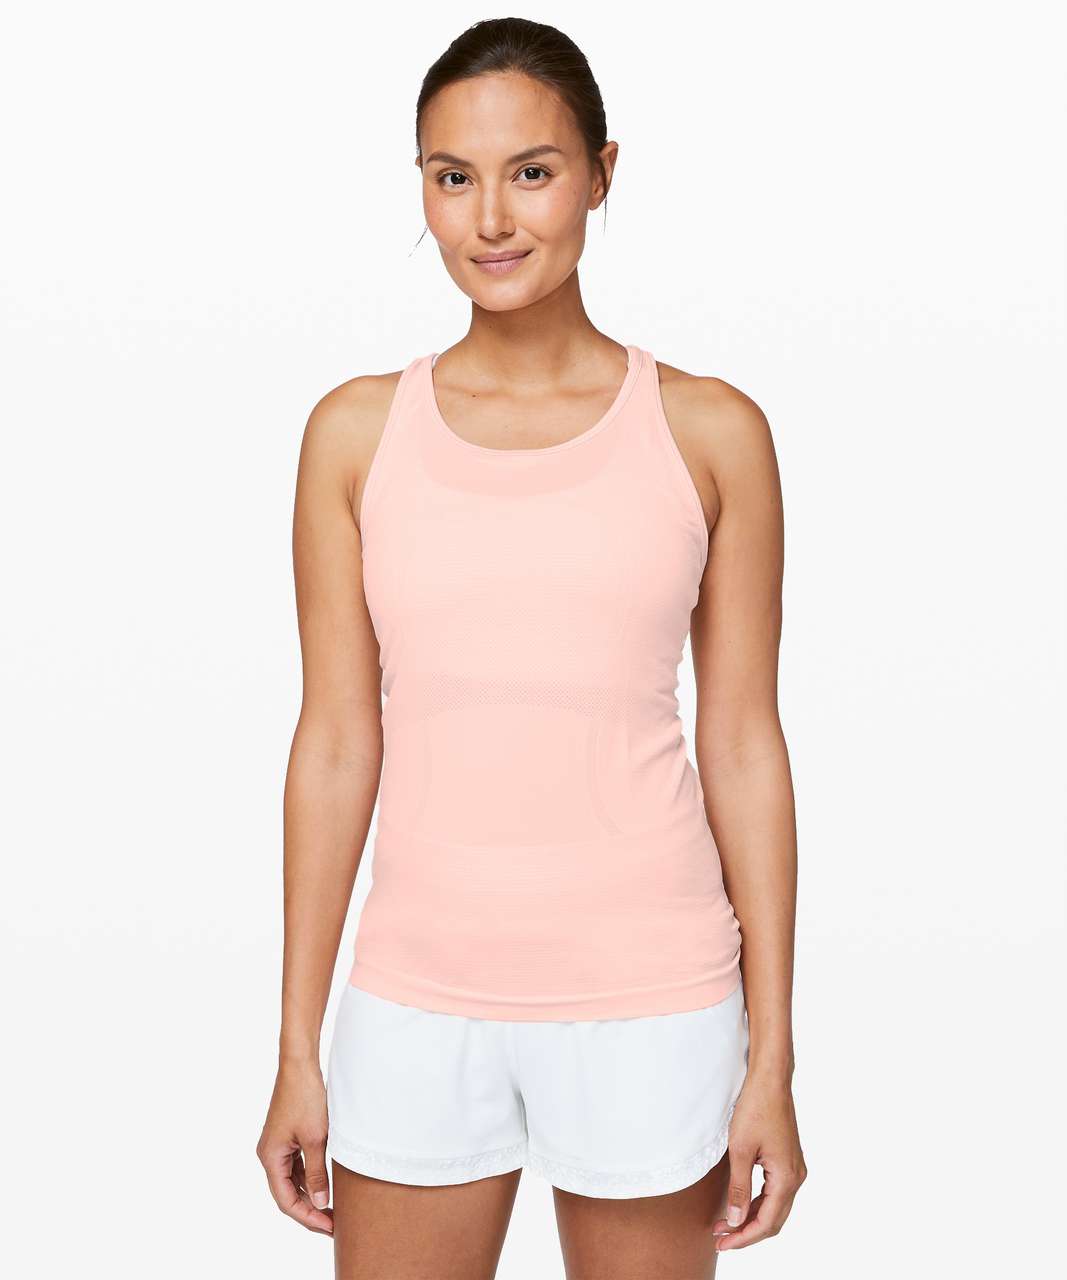 Lululemon Swiftly Tech Strappy Tank - Butter Pink / Butter Pink